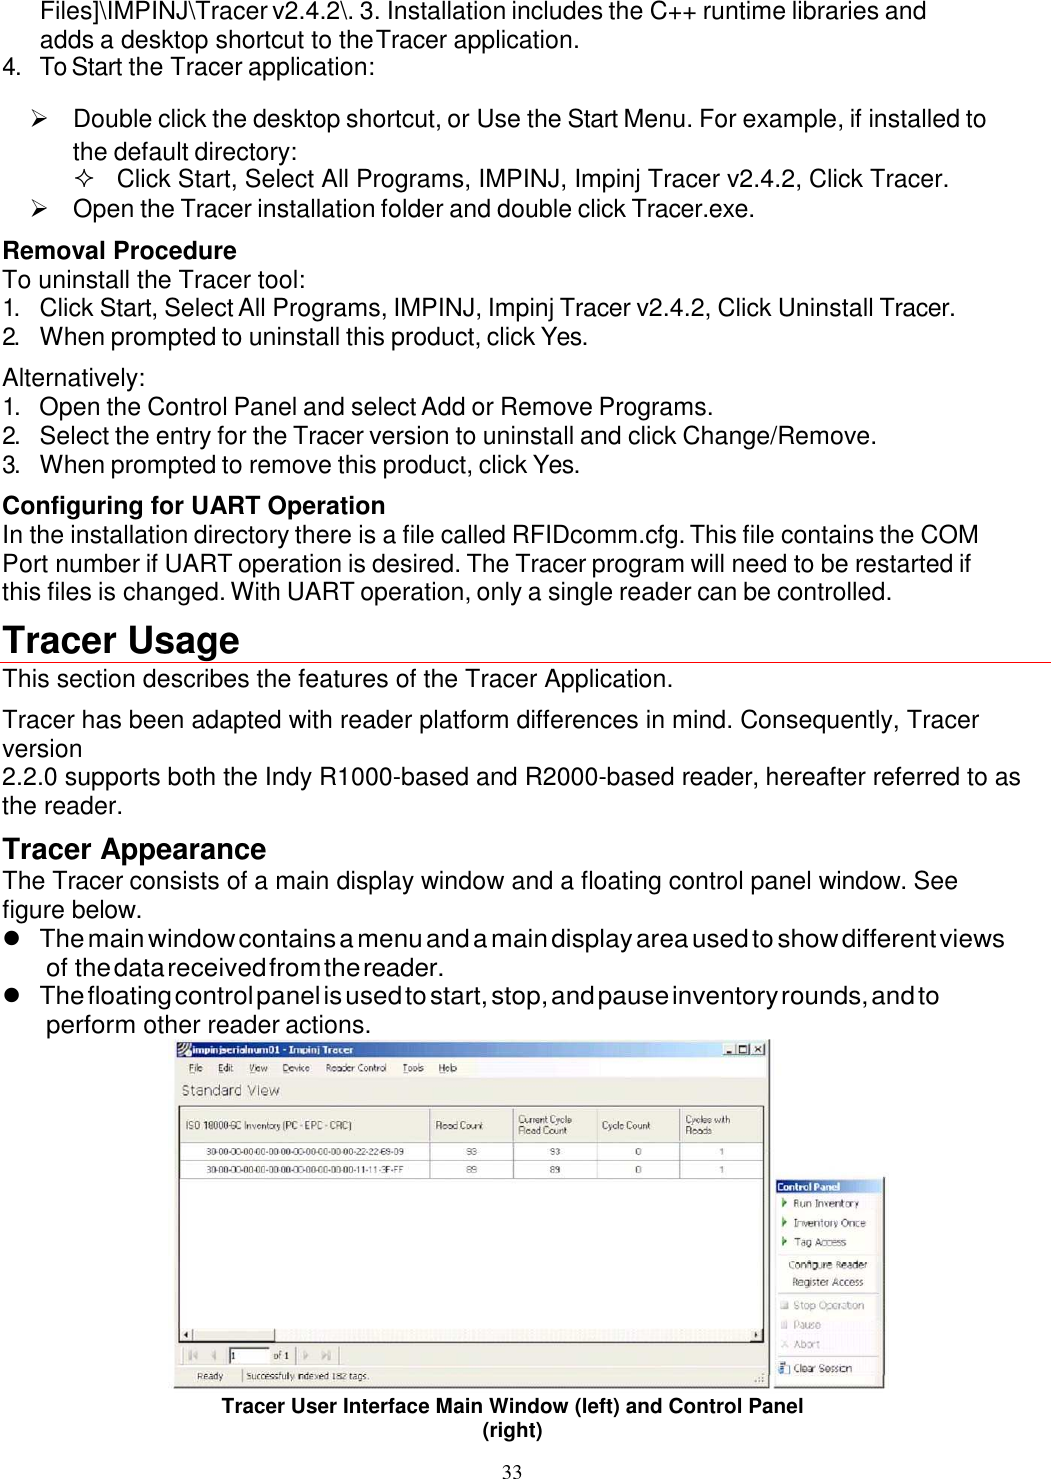 33  Files]\IMPINJ\Tracer v2.4.2\. 3. Installation includes the C++ runtime libraries and adds a desktop shortcut to the Tracer application. 4. To Start the Tracer application:   Double click the desktop shortcut, or Use the Start Menu. For example, if installed to the default directory:   Click Start, Select All Programs, IMPINJ, Impinj Tracer v2.4.2, Click Tracer.   Open the Tracer installation folder and double click Tracer.exe. Removal Procedure To uninstall the Tracer tool: 1. Click Start, Select All Programs, IMPINJ, Impinj Tracer v2.4.2, Click Uninstall Tracer. 2. When prompted to uninstall this product, click Yes. Alternatively: 1. Open the Control Panel and select Add or Remove Programs. 2. Select the entry for the Tracer version to uninstall and click Change/Remove. 3. When prompted to remove this product, click Yes. Configuring for UART Operation In the installation directory there is a file called RFIDcomm.cfg. This file contains the COM Port number if UART operation is desired. The Tracer program will need to be restarted if this files is changed. With UART operation, only a single reader can be controlled. Tracer Usage  This section describes the features of the Tracer Application. Tracer has been adapted with reader platform differences in mind. Consequently, Tracer version 2.2.0 supports both the Indy R1000-based and R2000-based reader, hereafter referred to as the reader. Tracer Appearance The Tracer consists of a main display window and a floating control panel window. See figure below.  The main window contains a menu and a main display area used to show different views of the data received from the reader.  The floating control panel is used to start, stop, and pause inventory rounds, and to perform other reader actions.  Tracer User Interface Main Window (left) and Control Panel (right) 